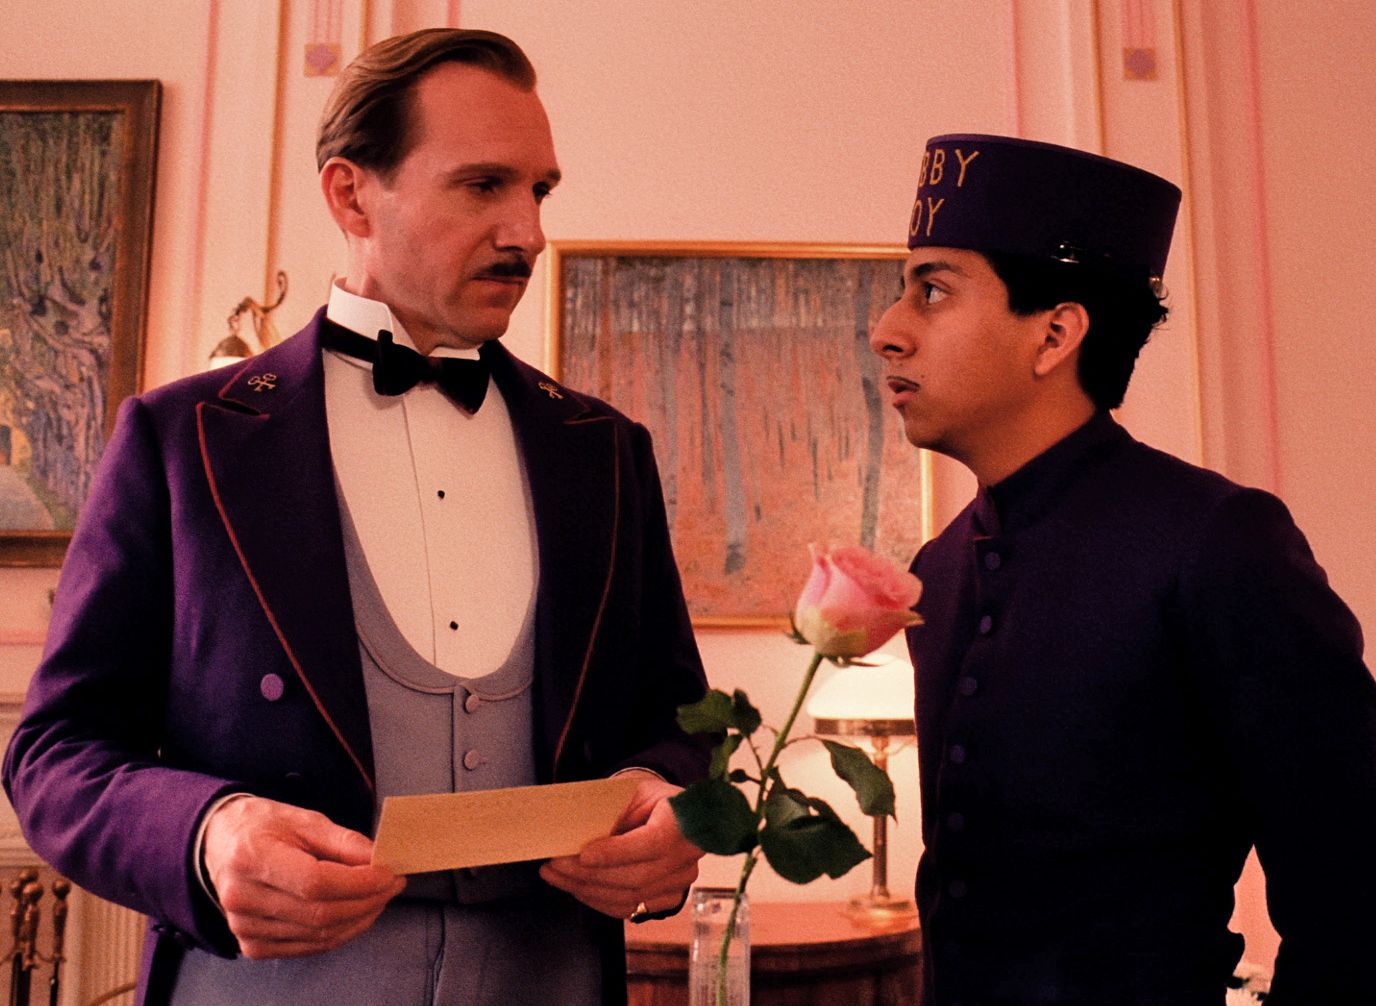 M. Gustave unimpressed by Zero - The Grand Budapest Hotel